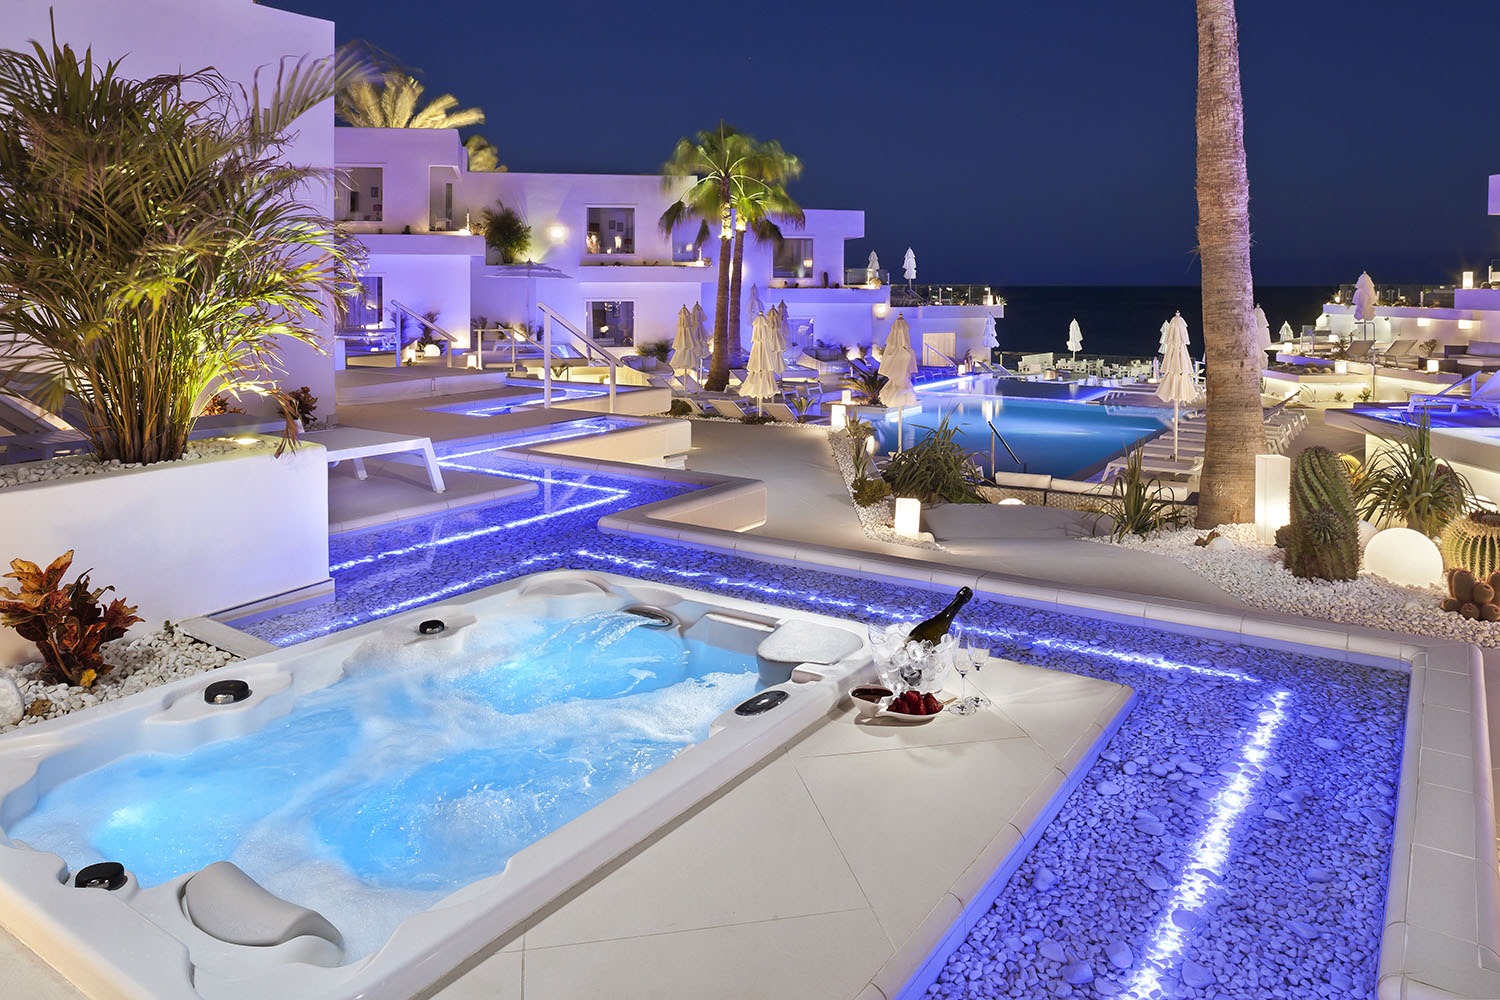 Lani's Suites Deluxe, Canary Islands, Spain,hotels in Spain